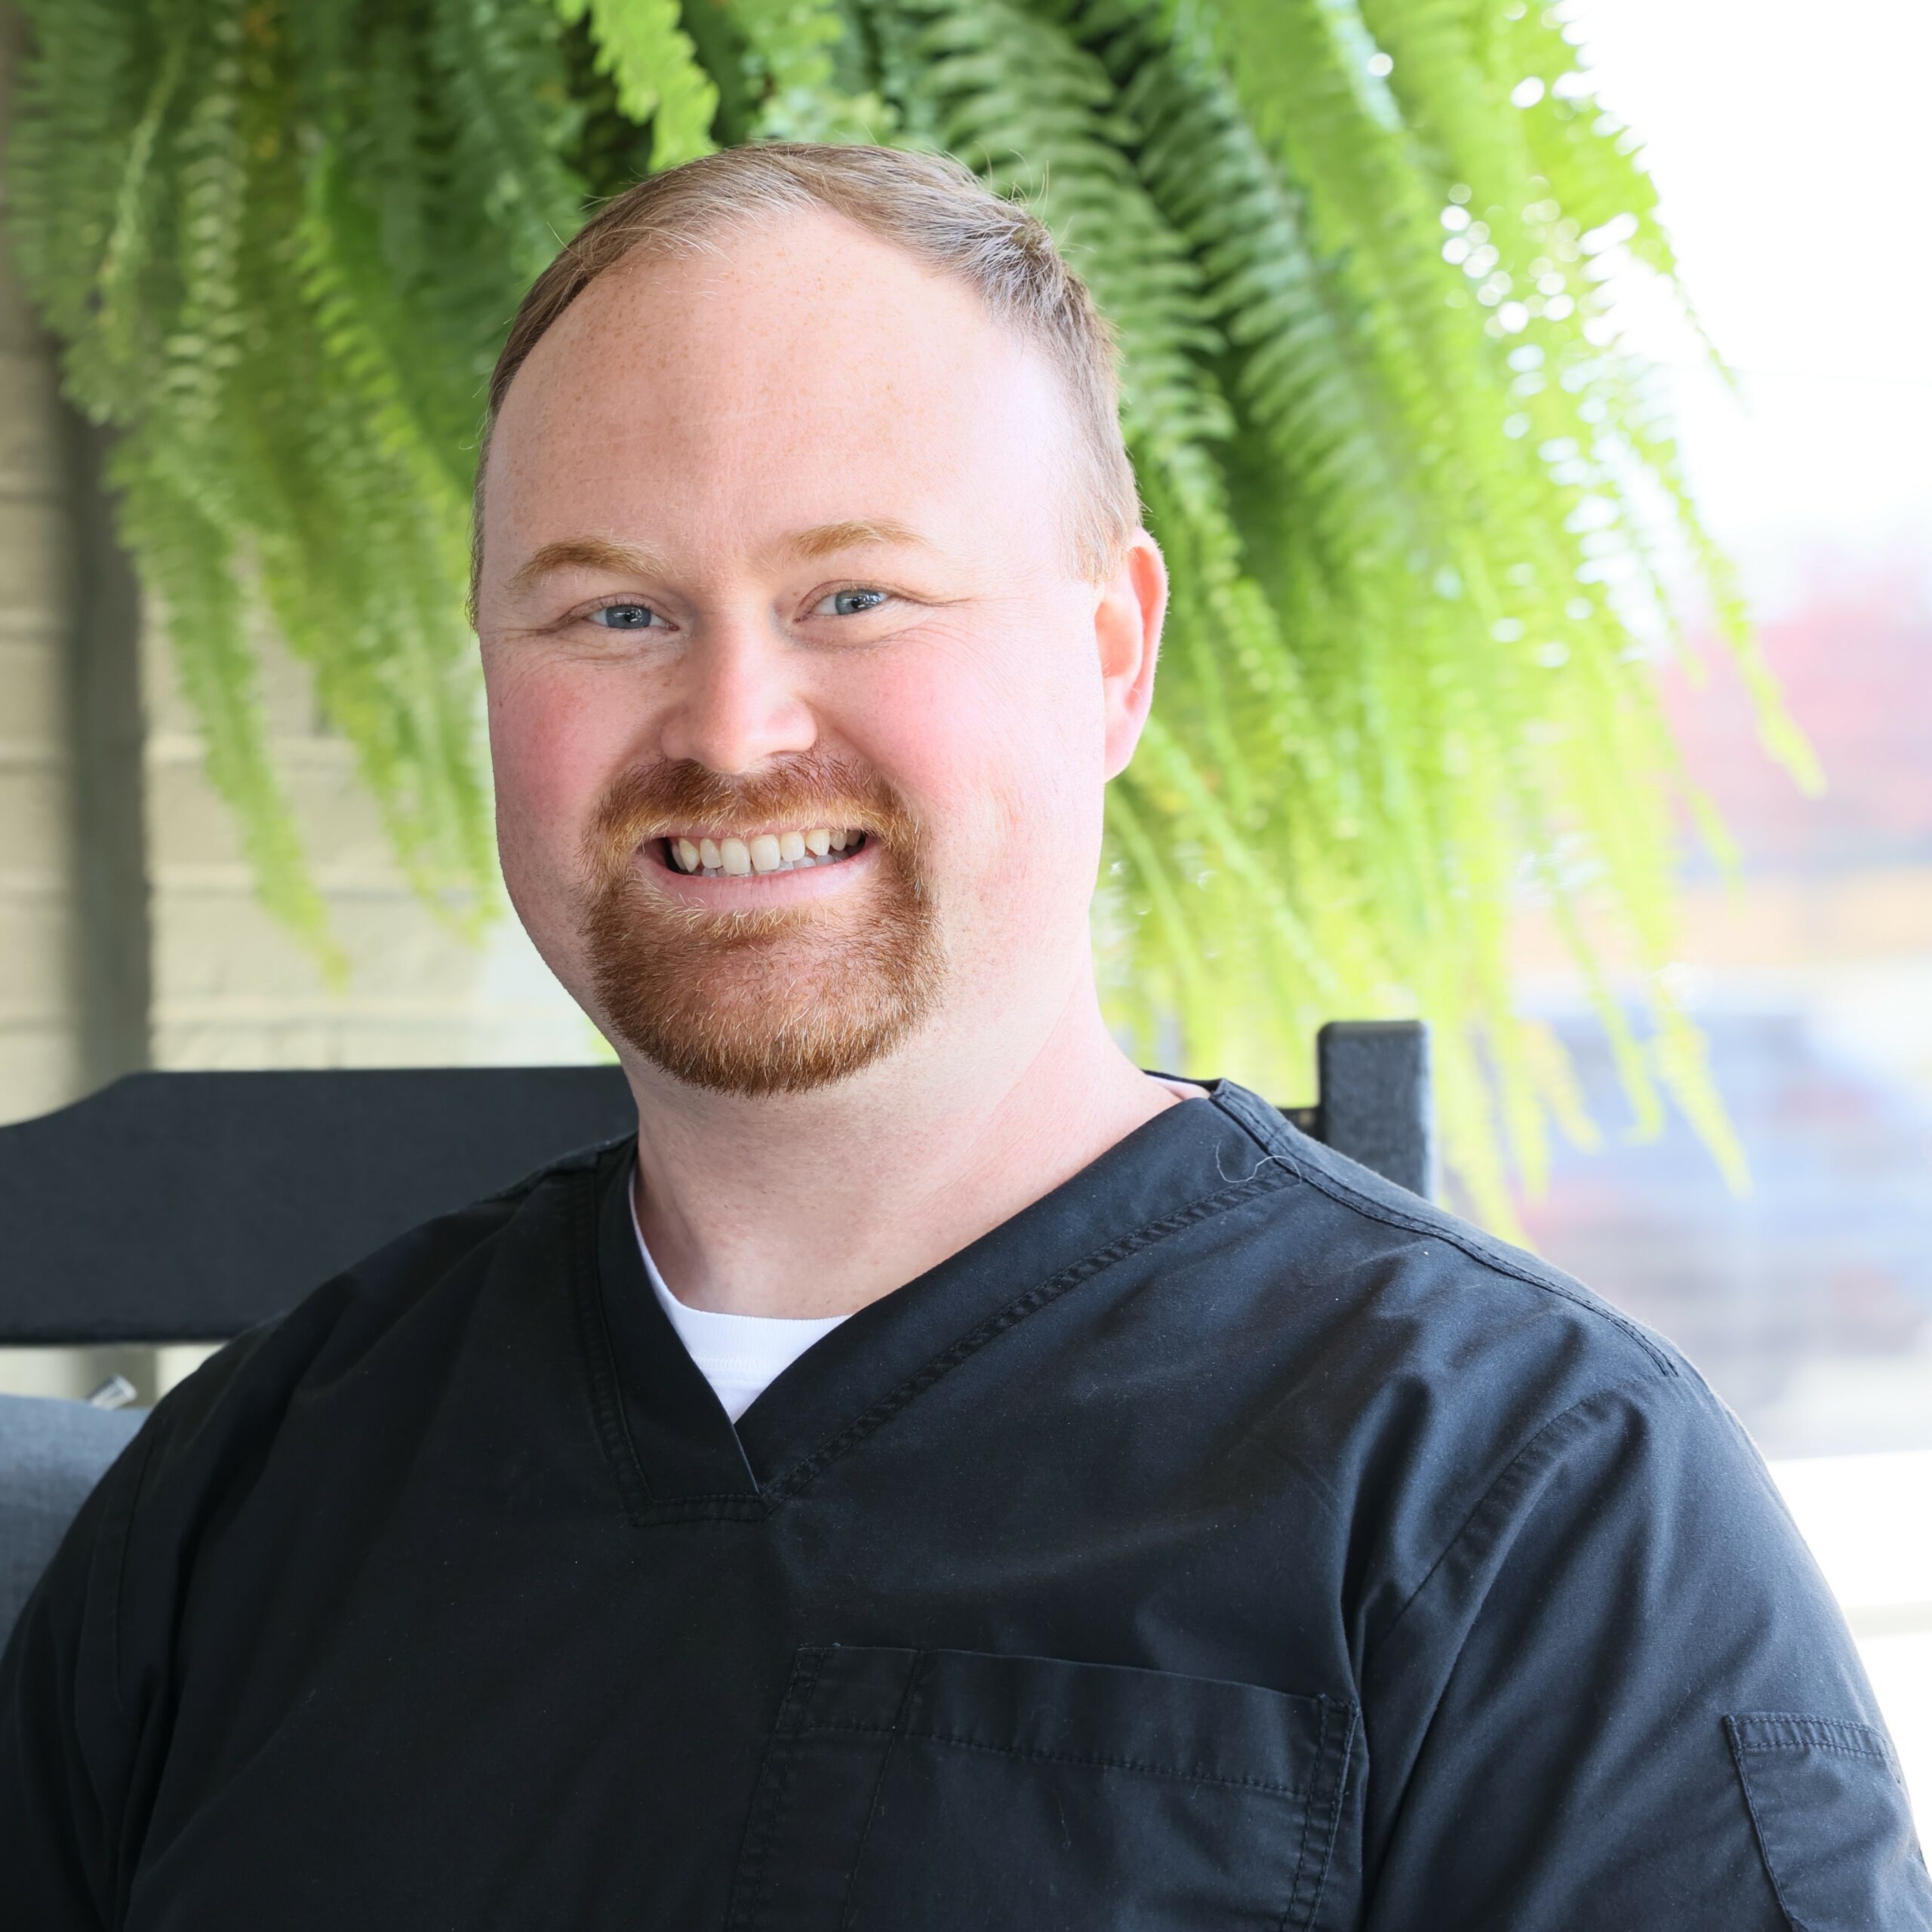 justin taylor physical therapy assistant jefferson county tn